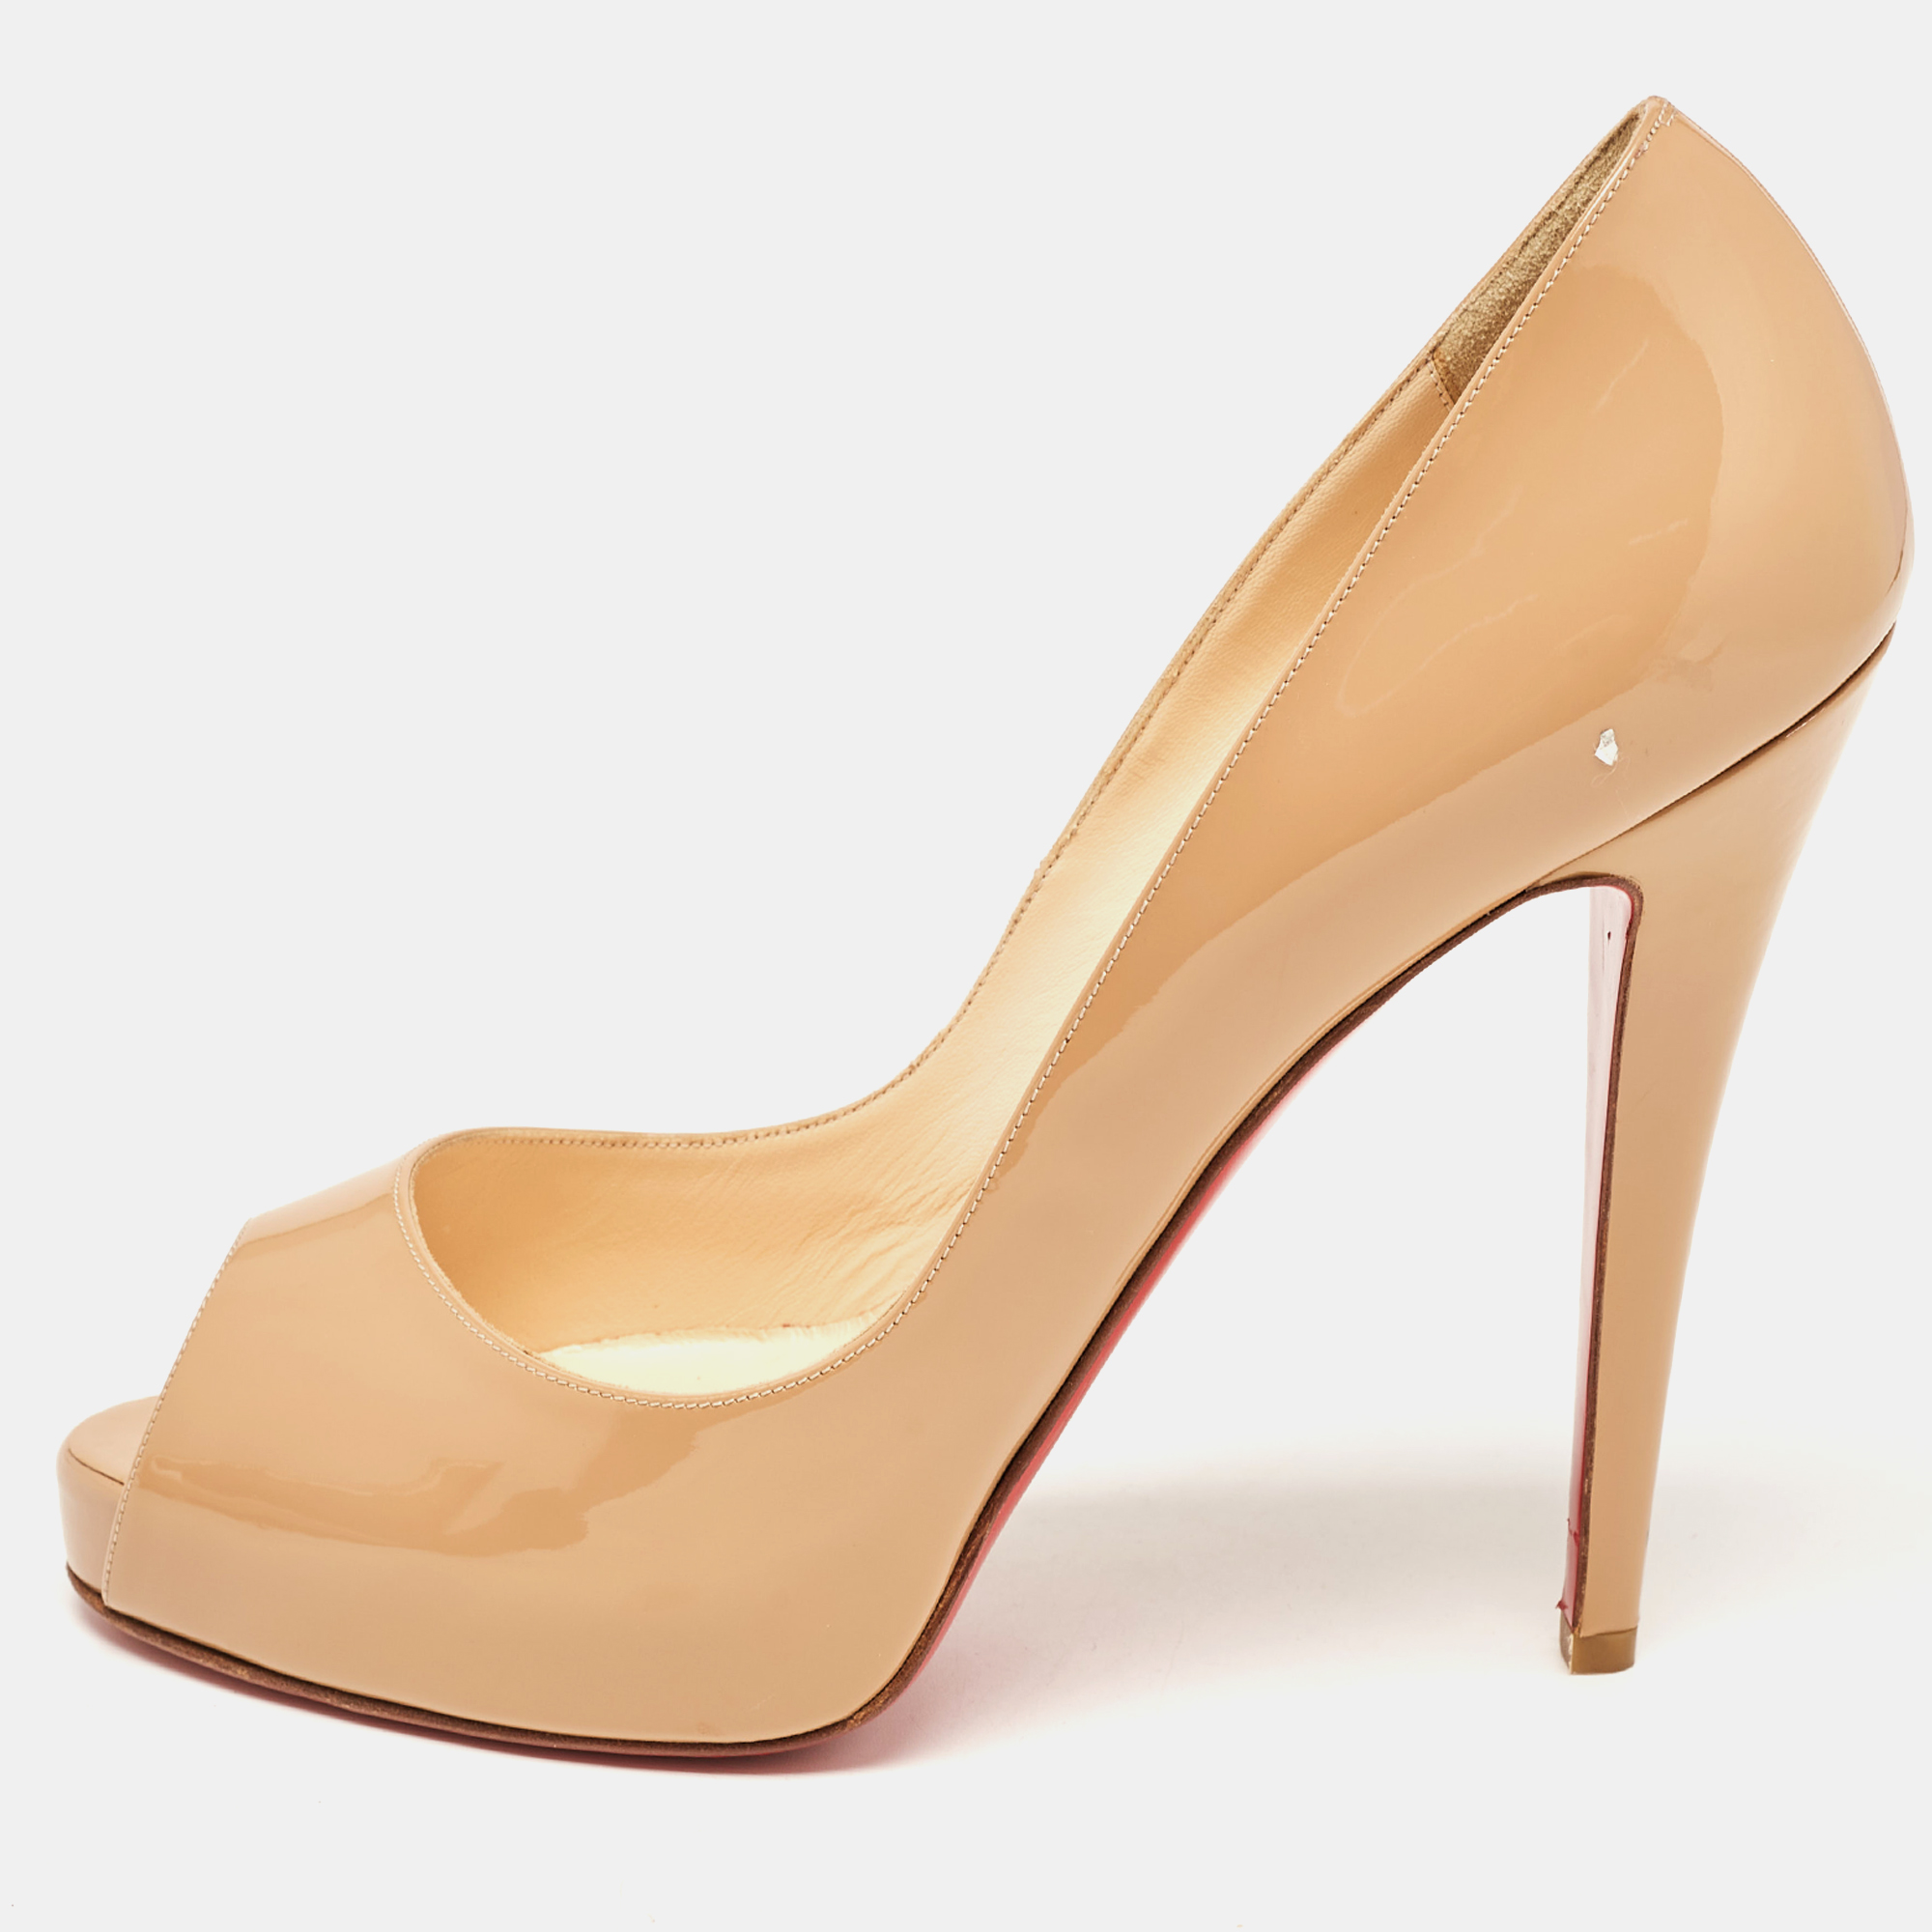 Pre-owned Christian Louboutin Beige Patent Leather Very Prive Pumps Size 41